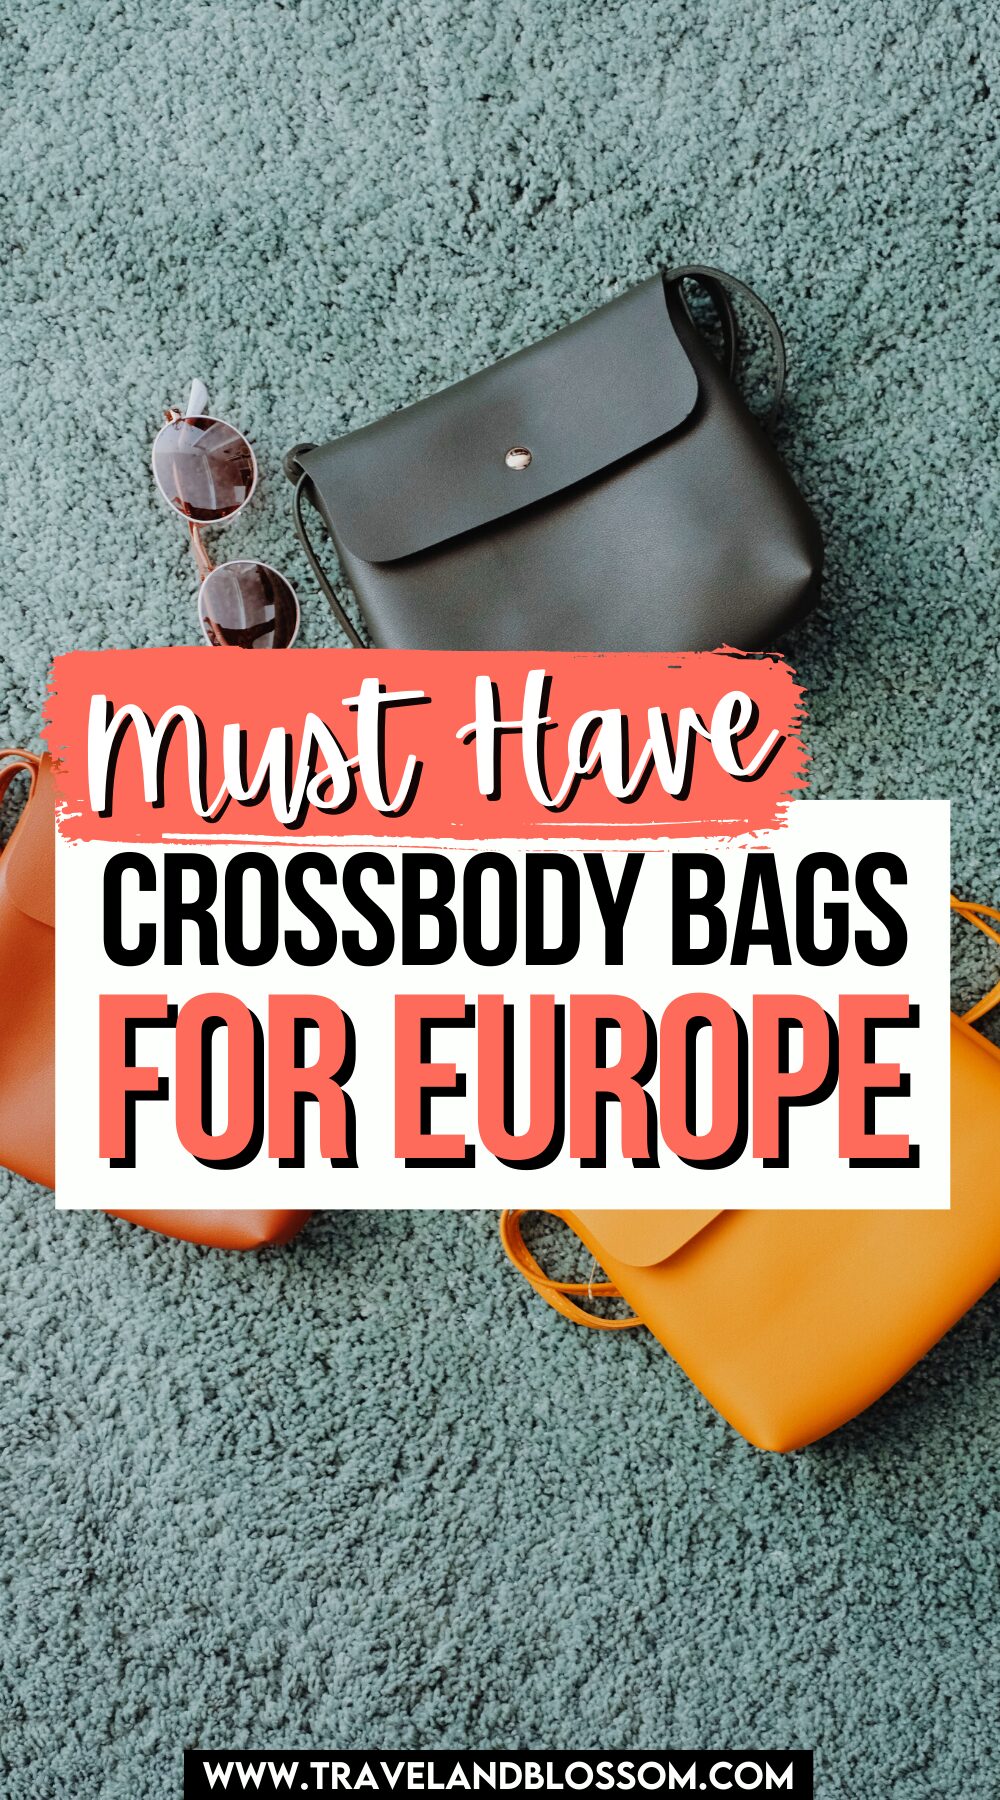 Buy The 7 Best Cross Body Bags For Travel in Europe